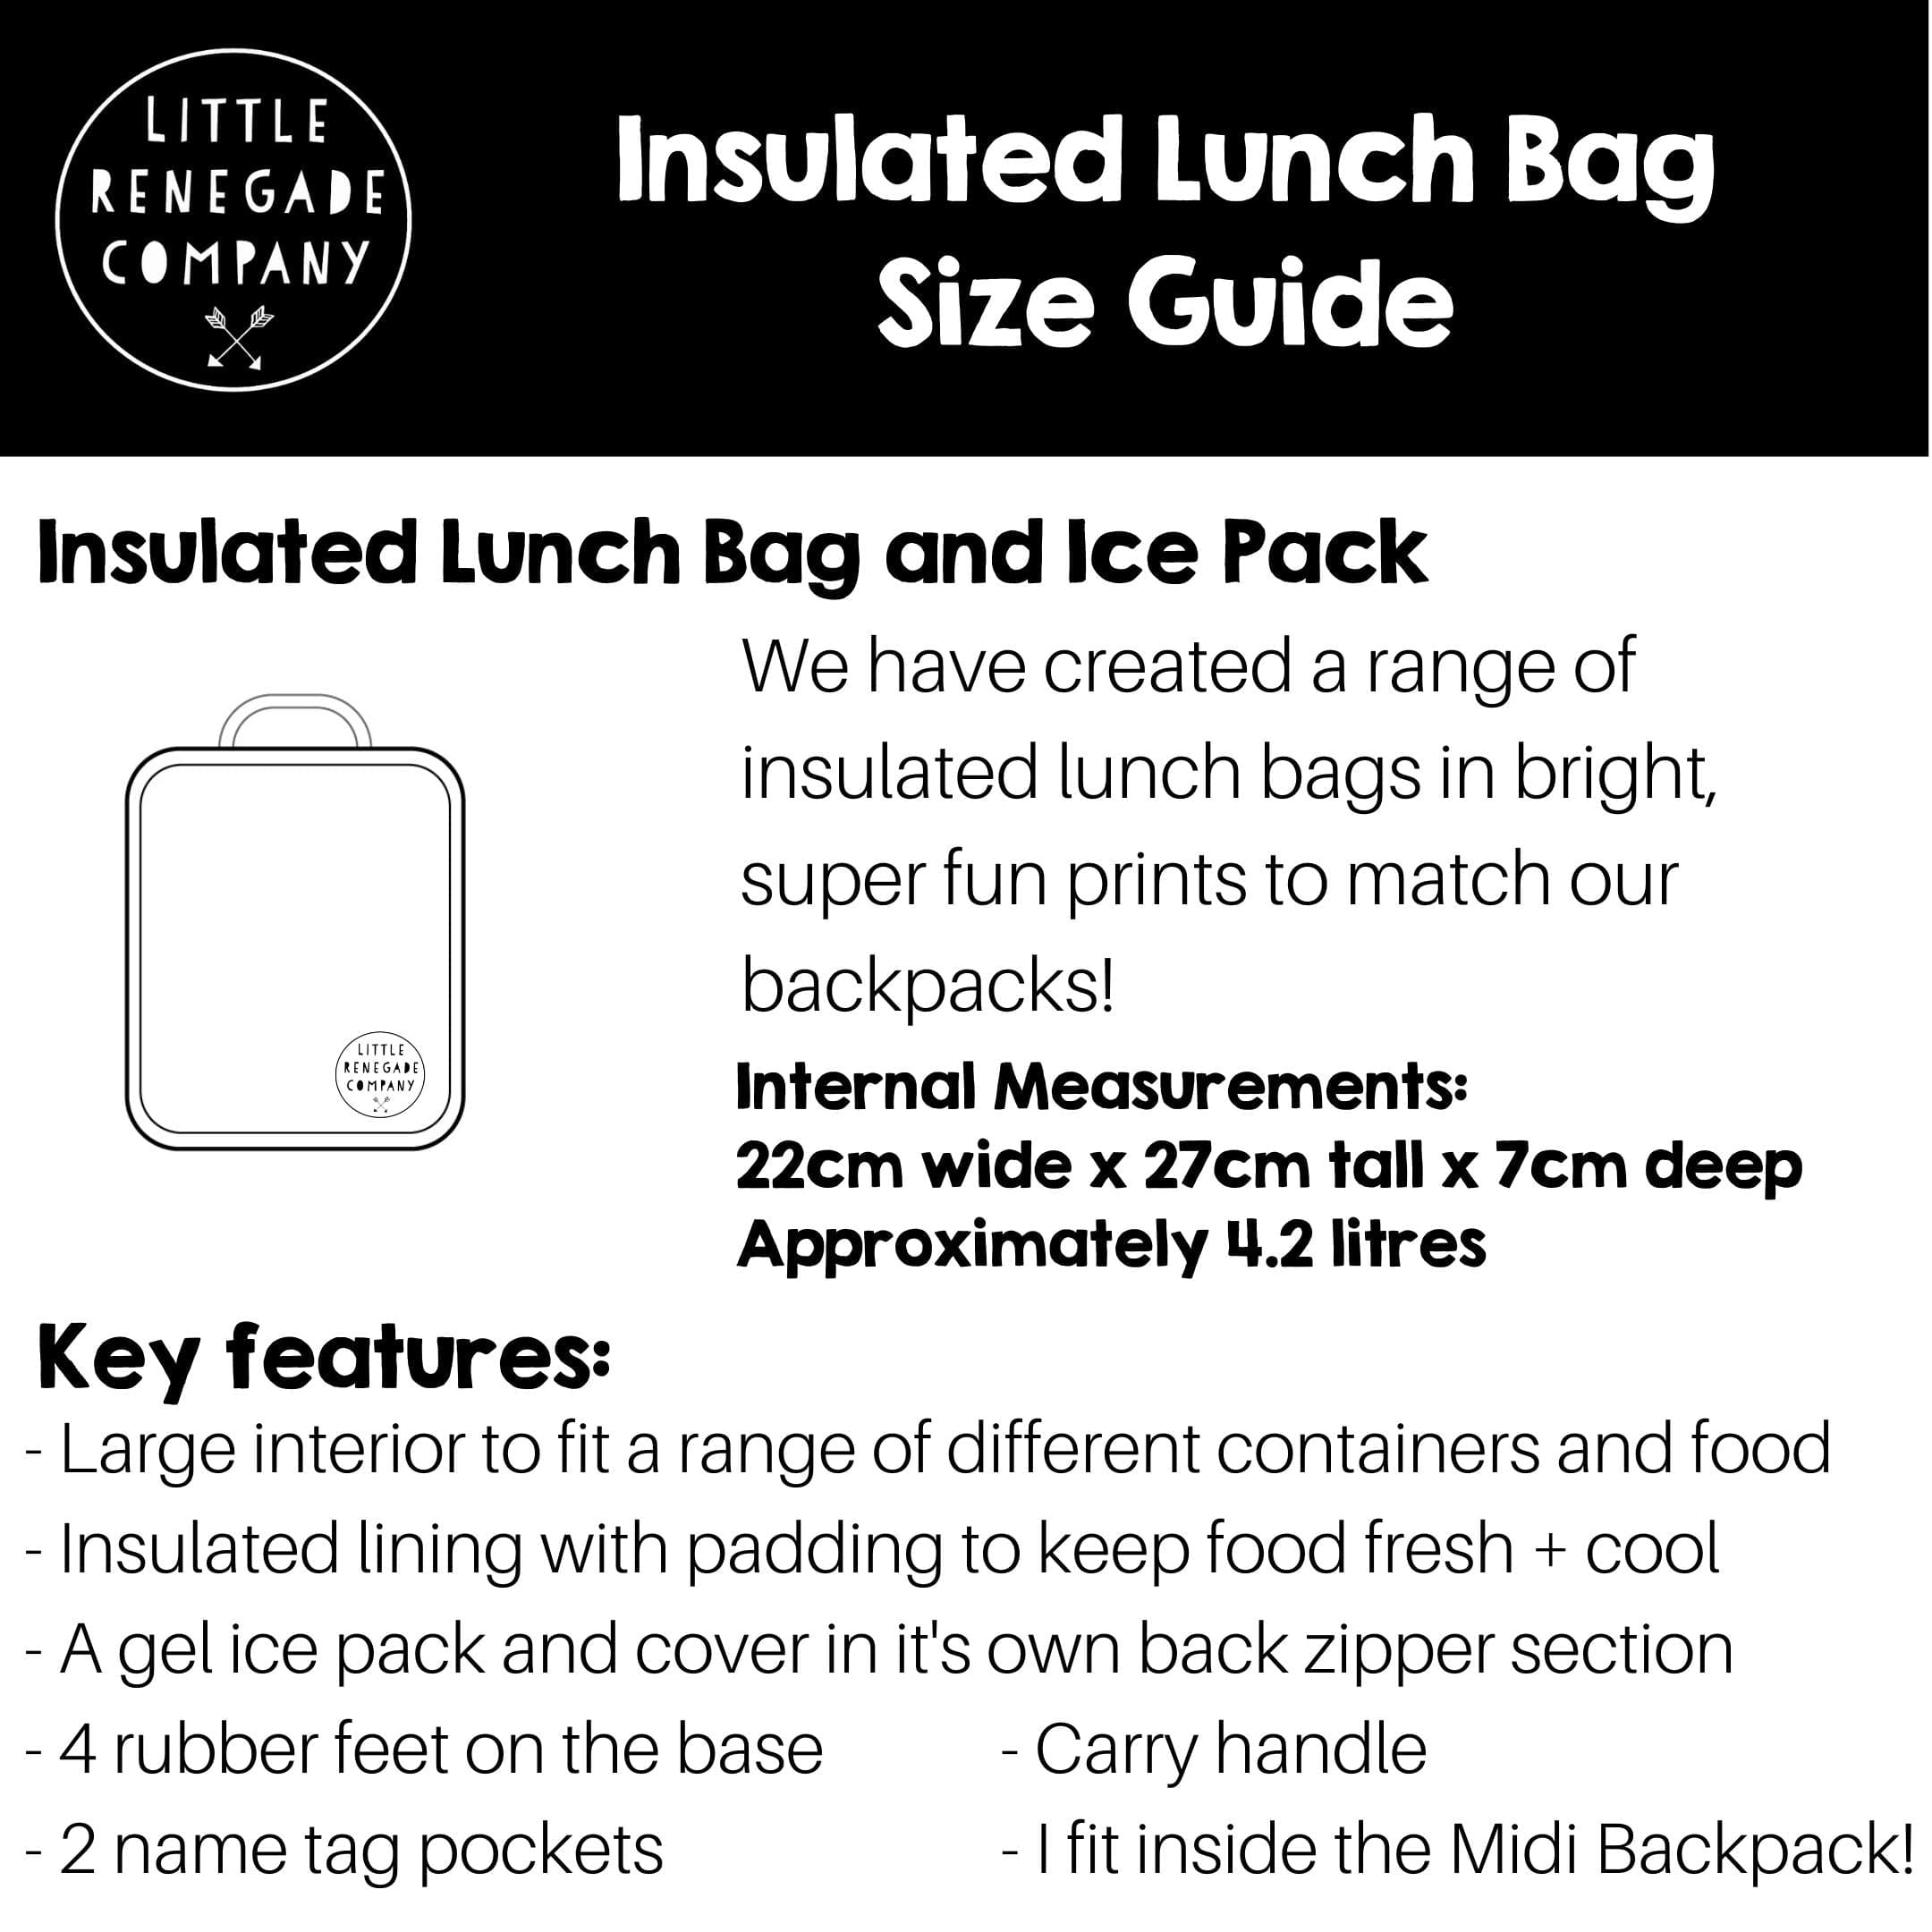 Little Renegade Company Accessory Feeding Future Insulated Lunch Bag